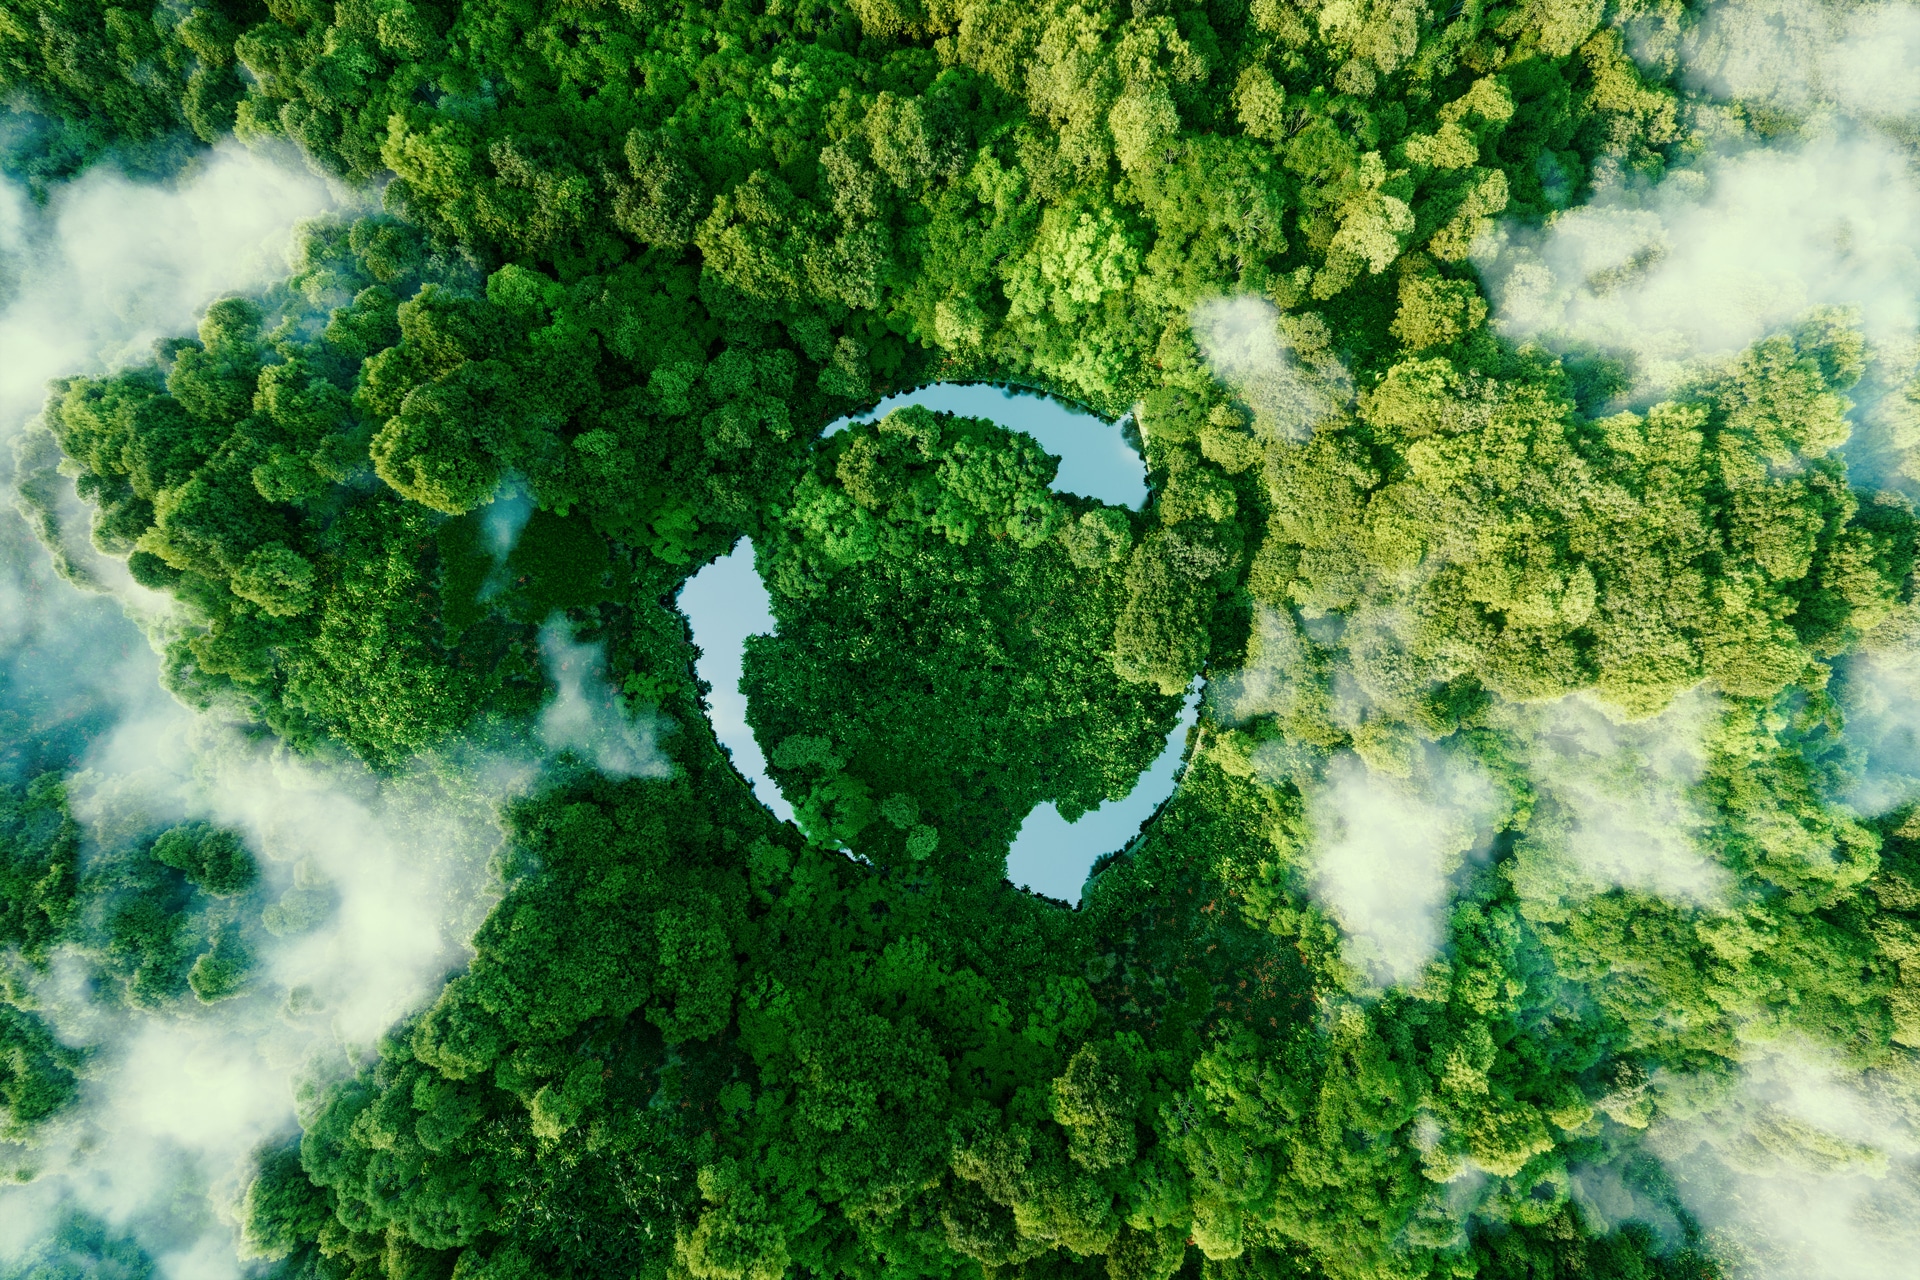 Recycle circle of lakes in a forrest setting